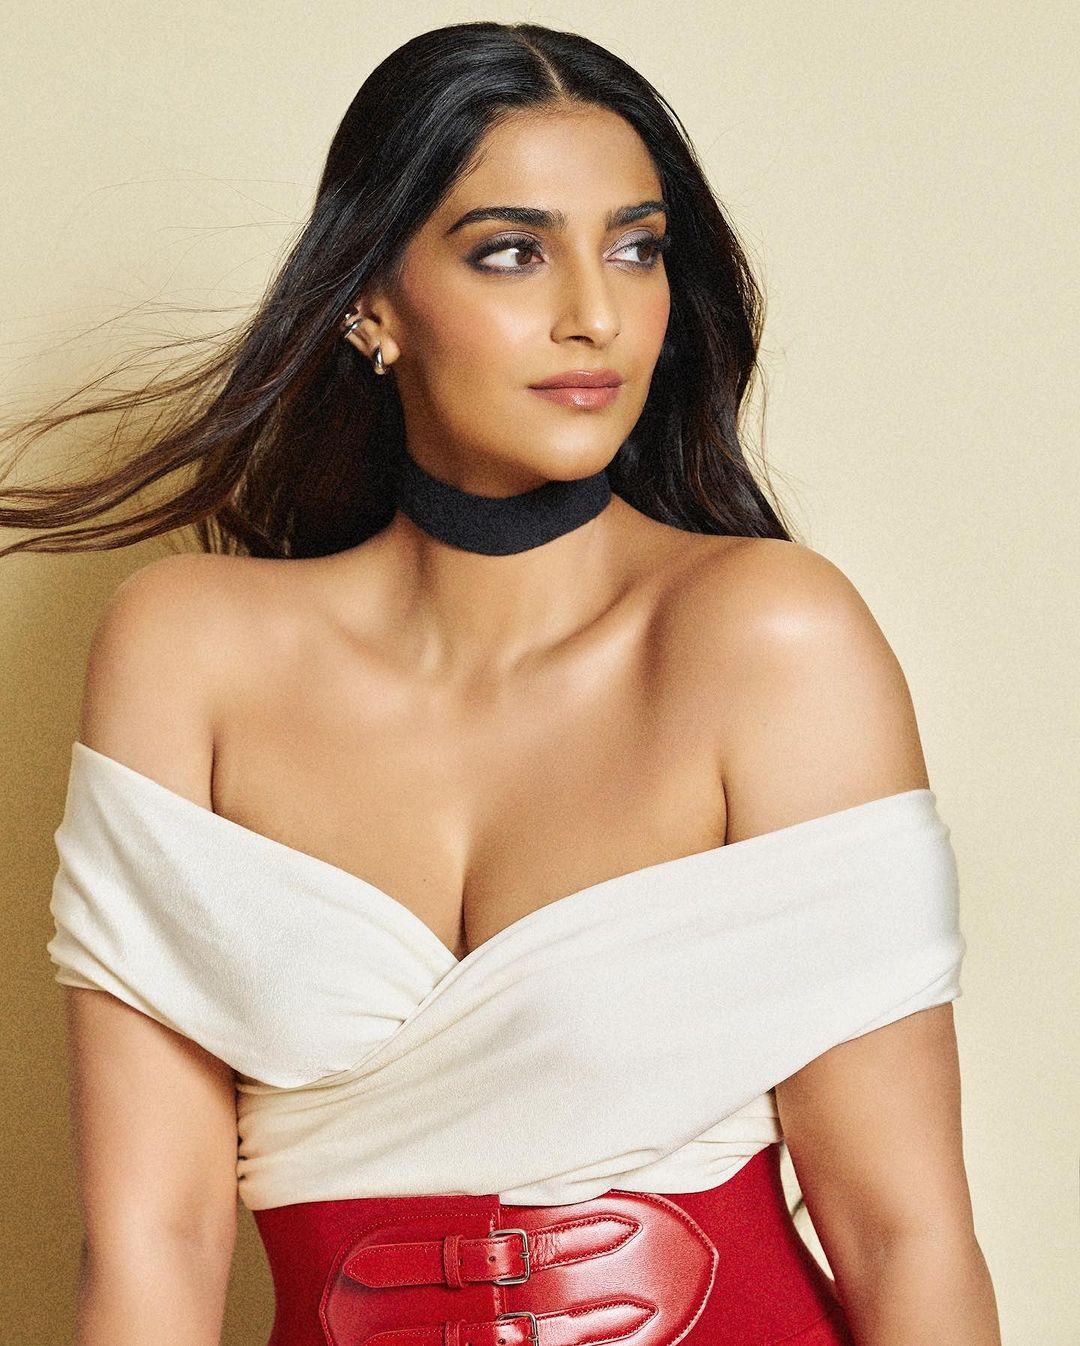 Sonam Kapoor, the ultimate style diva, showcased her impeccable fashion sense in each of her outfits. While choosing the best among her amazing avatars is a tough task, a particular ensemble stands out, perfectly aligning with the Valentine's vibe